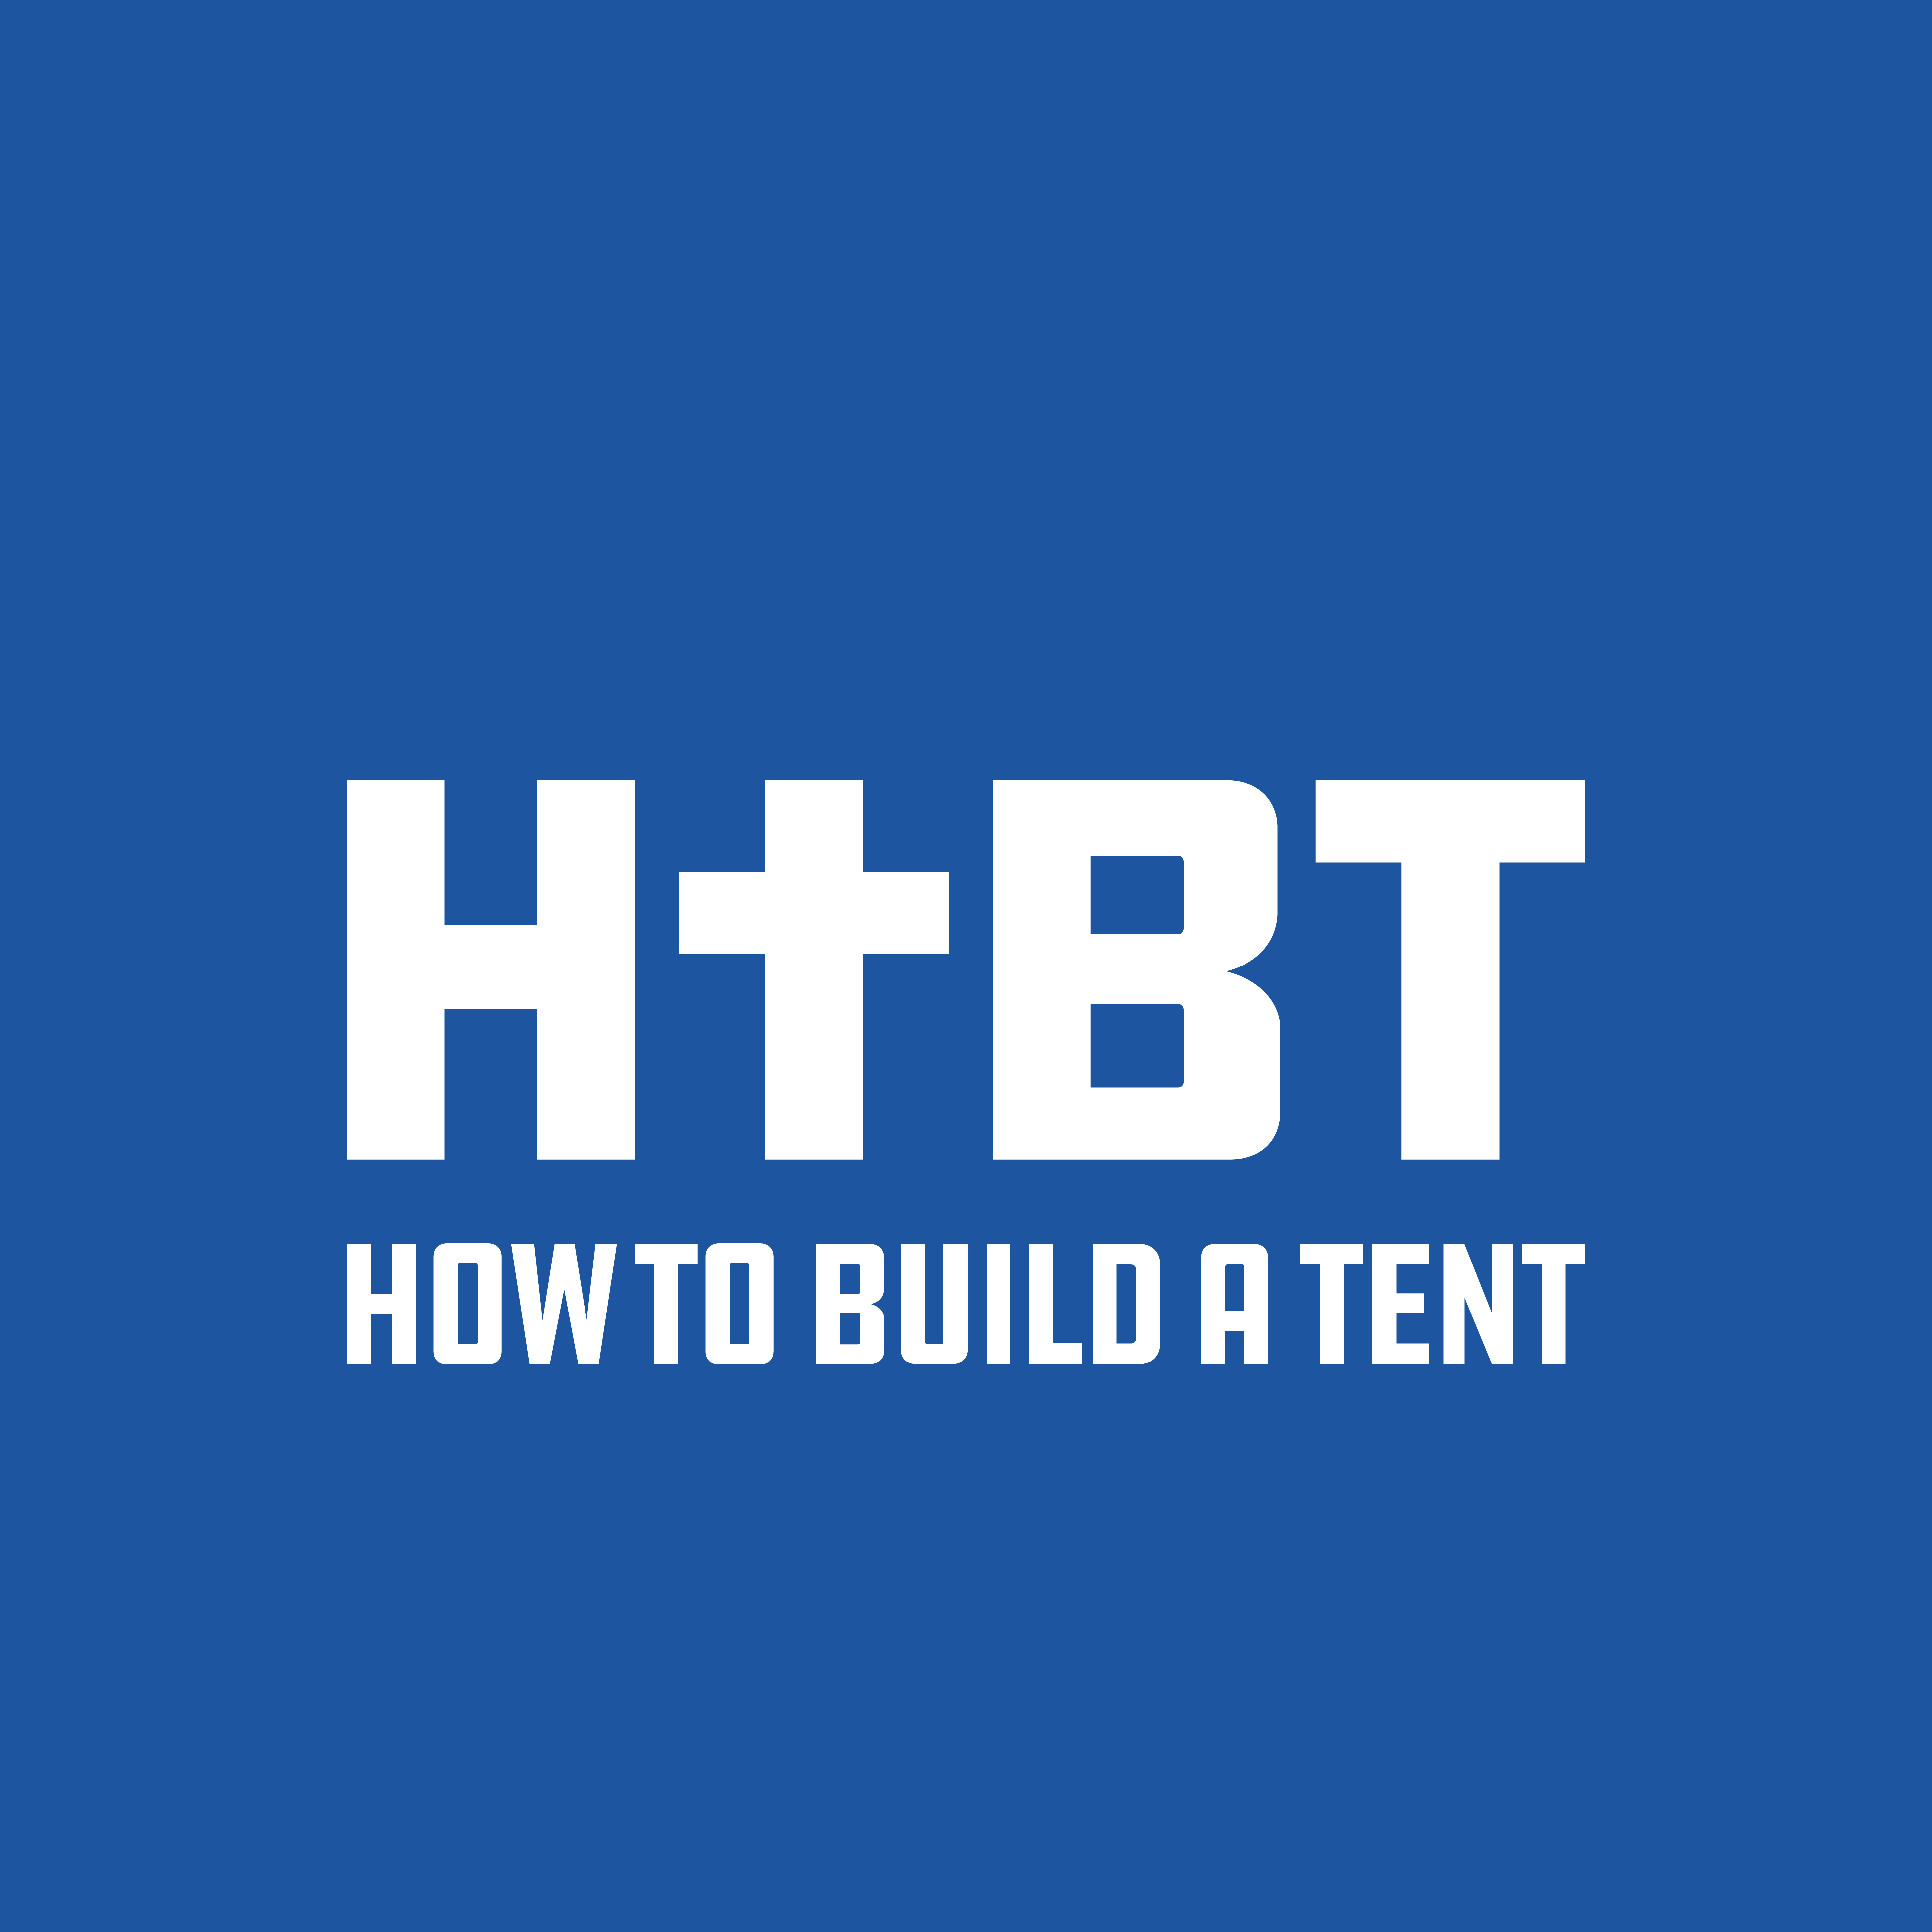 How to Build a Tent